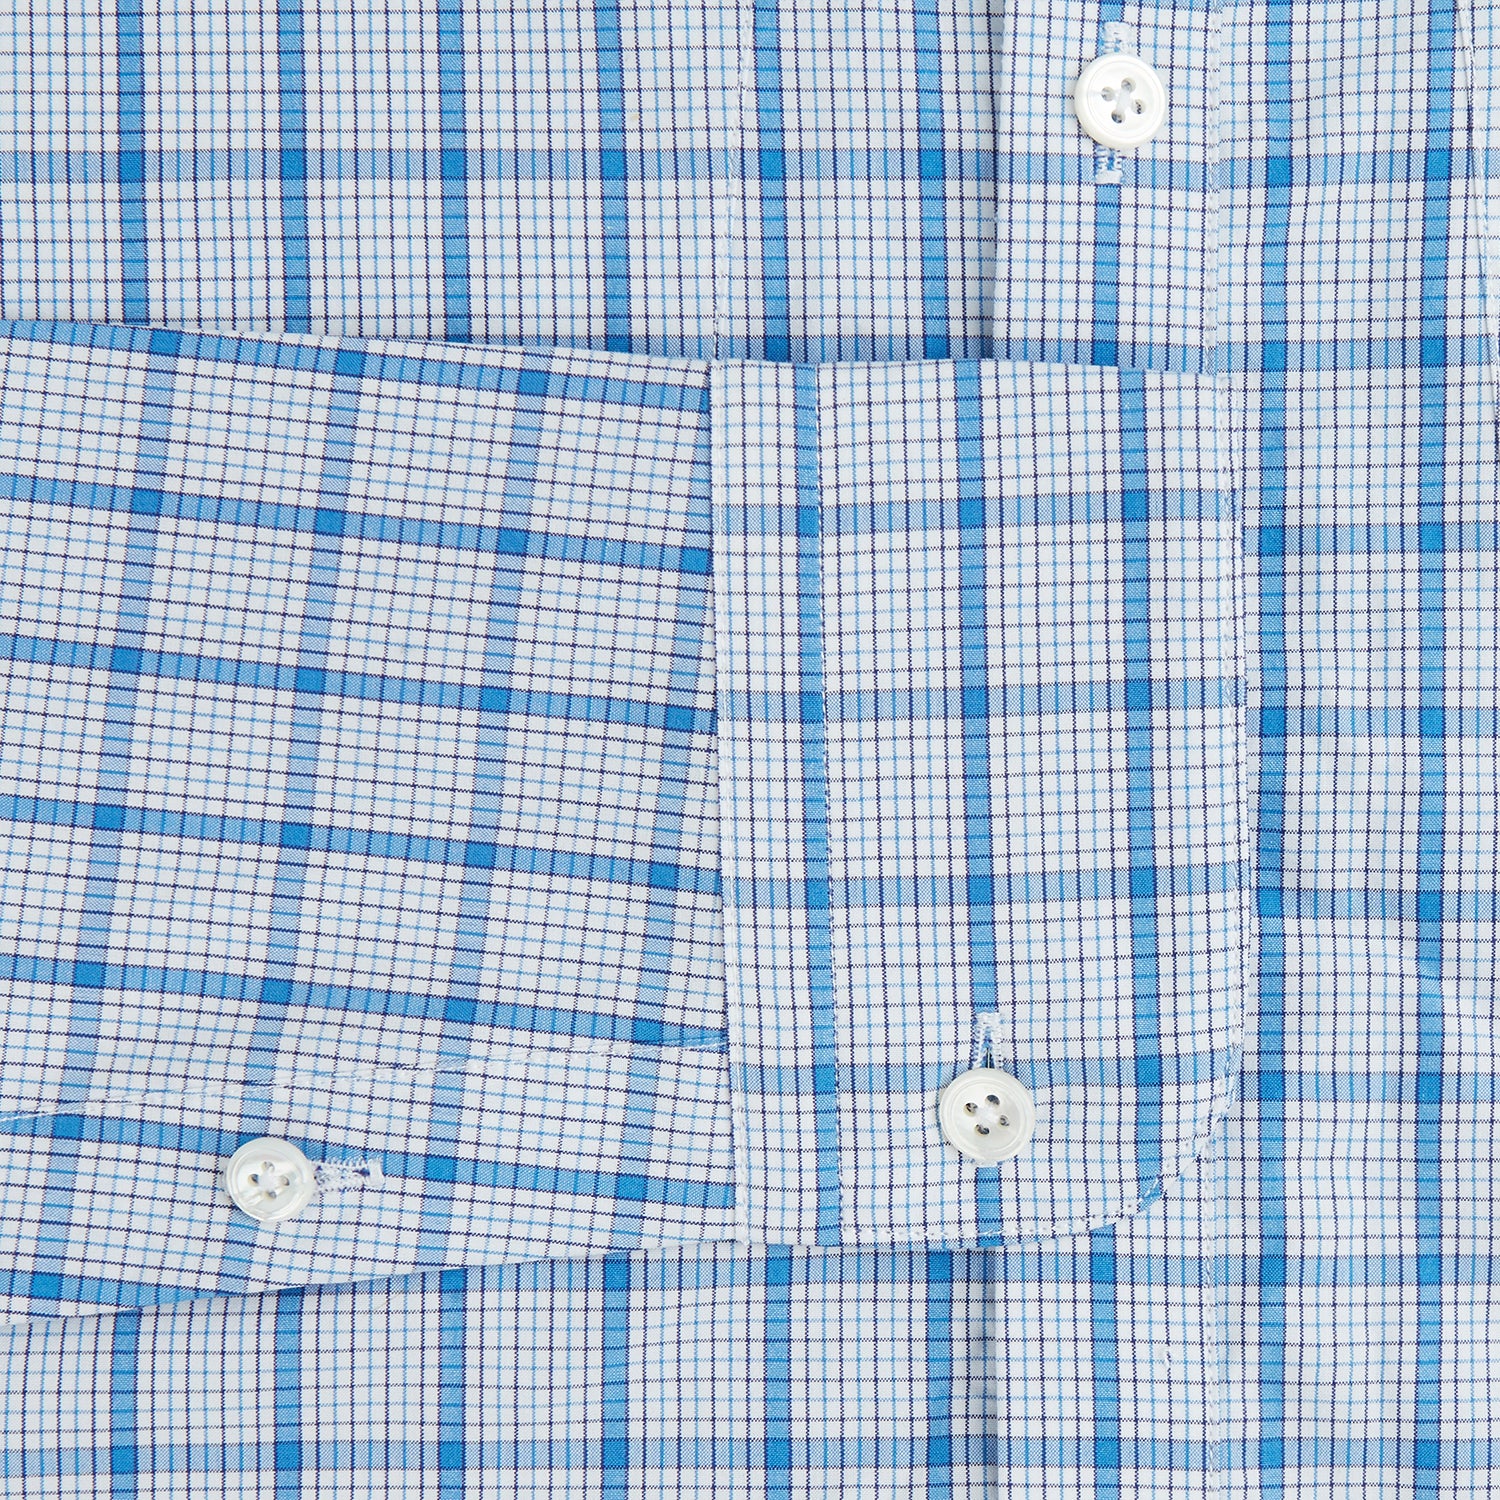 Blue Graph Overlay Check Piccadilly Shirt